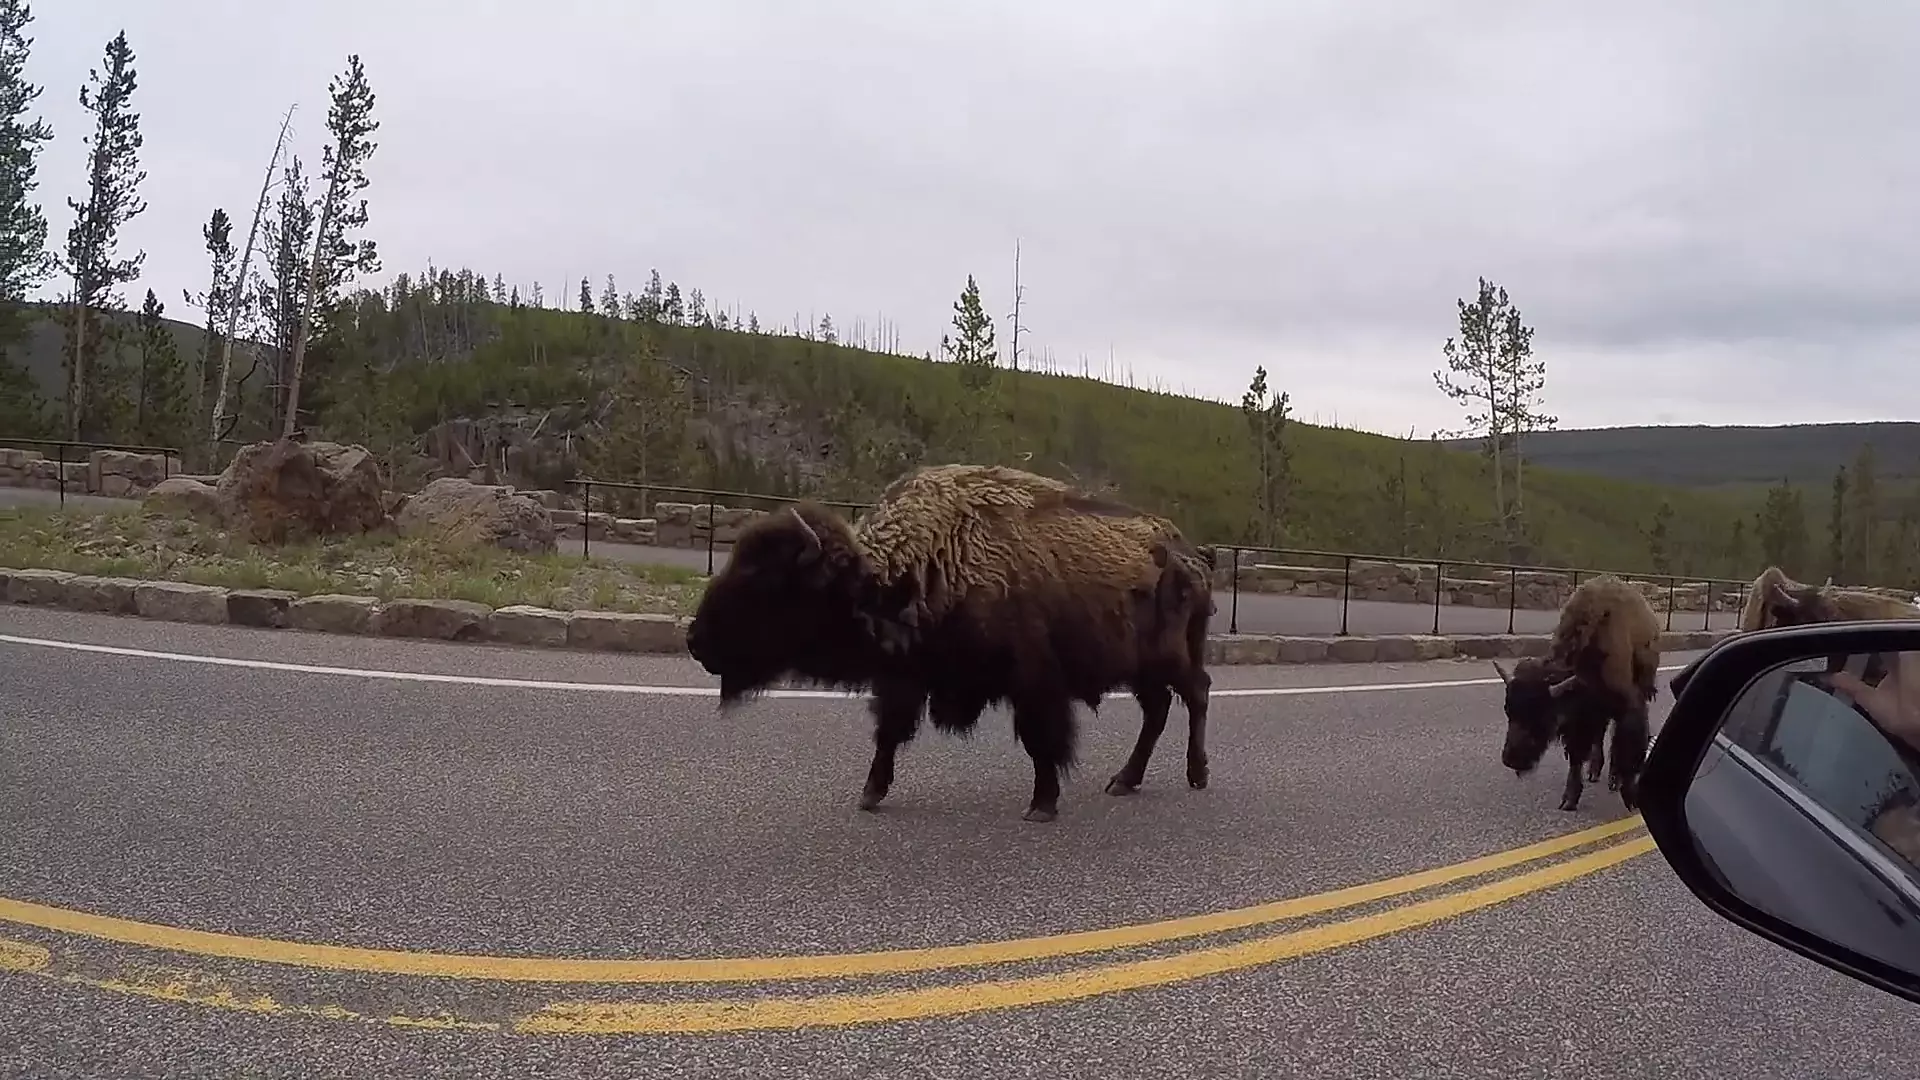 Yellowstone Park Reports First Human-Bison Encounter of 2020